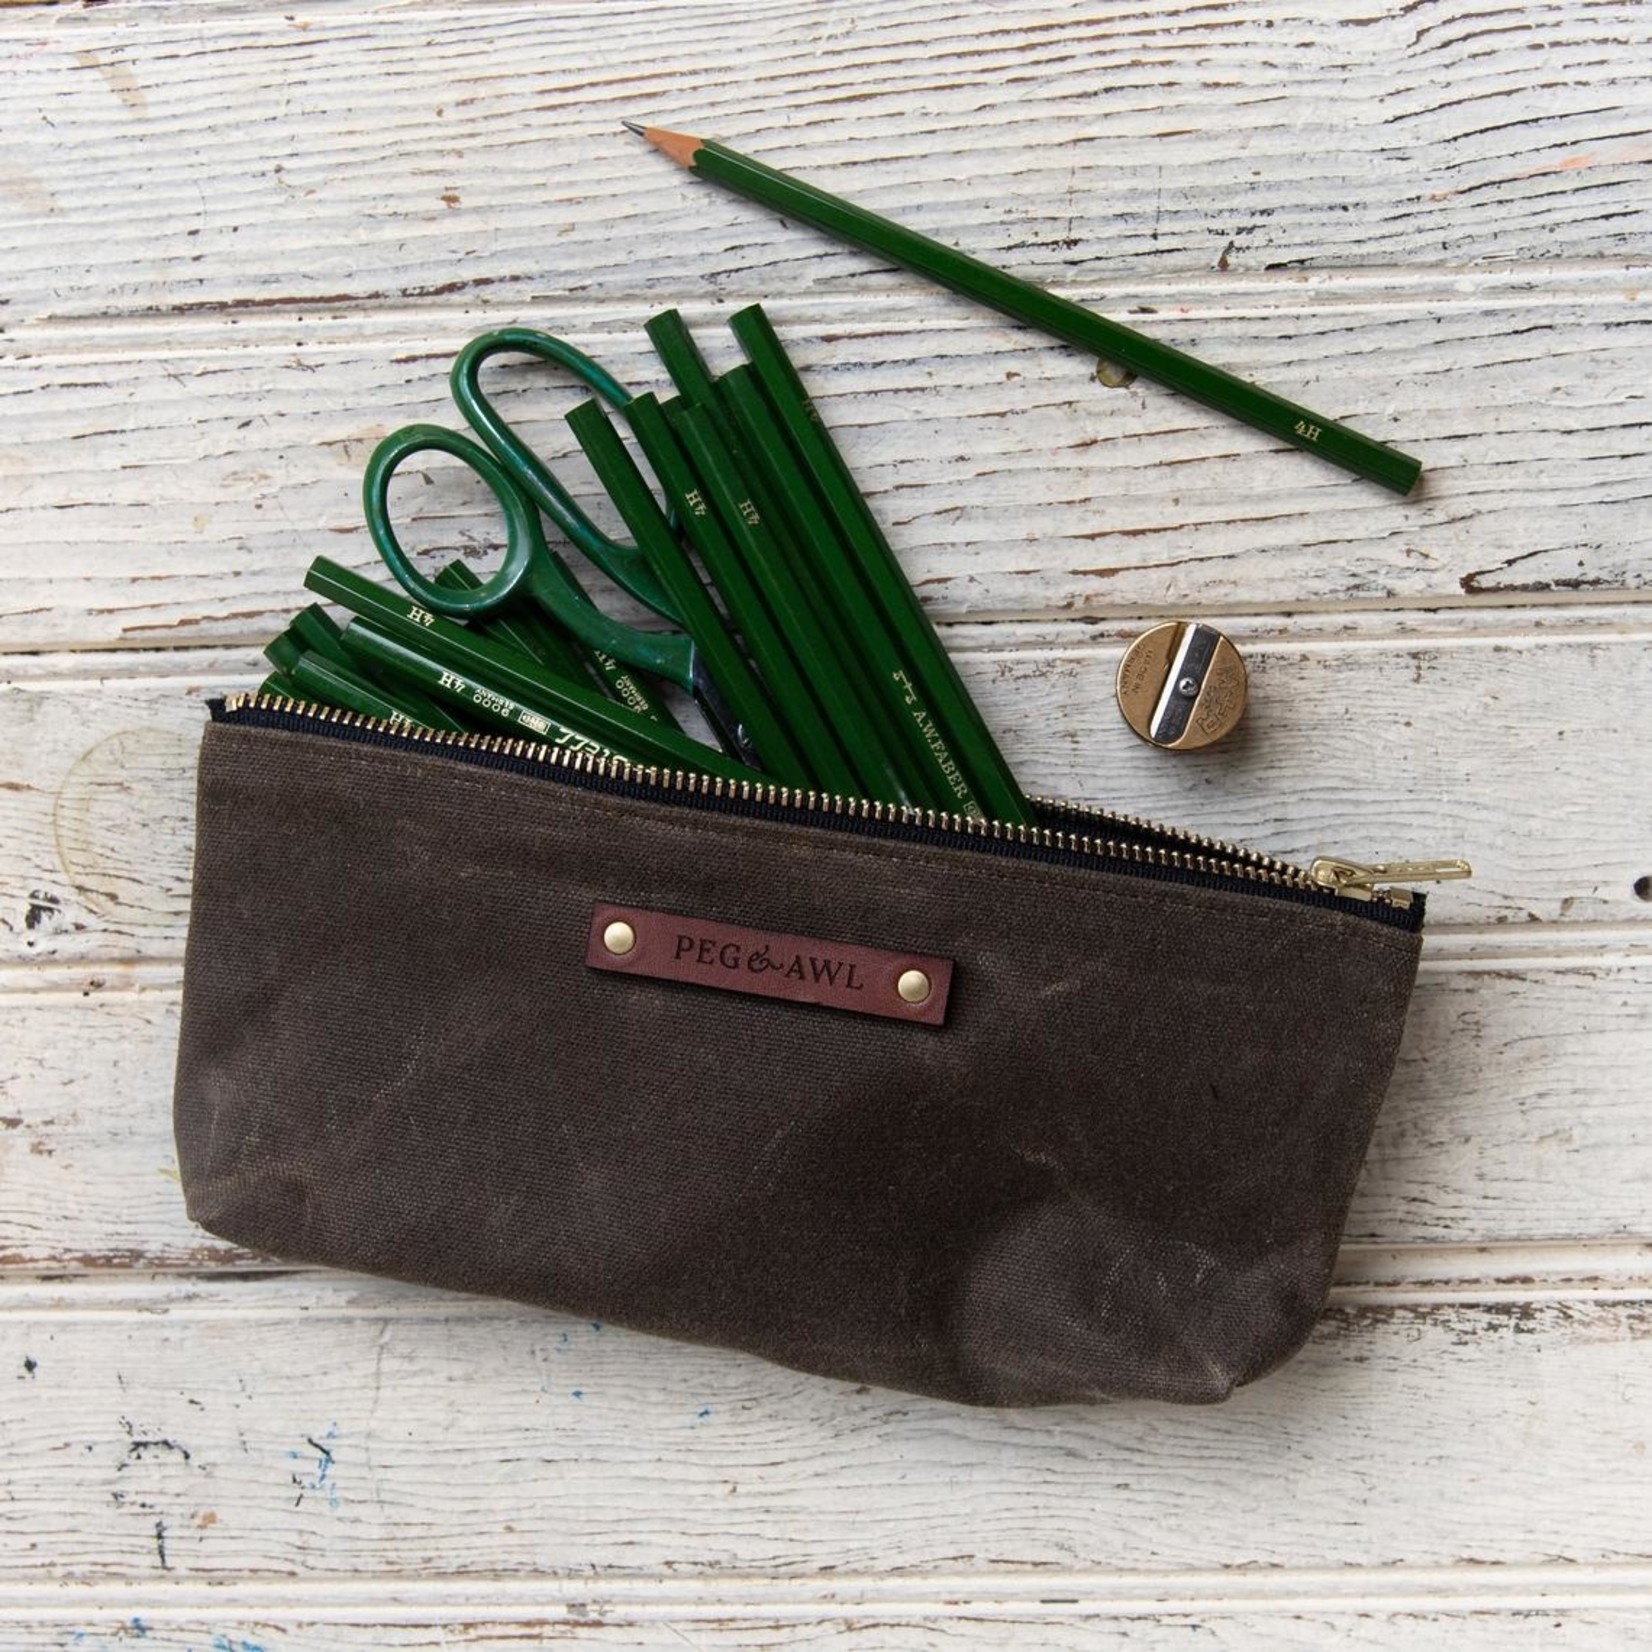 Bloom Pouch by Peg and Awl in Truffle Waxed Canvas with Colored Zipper